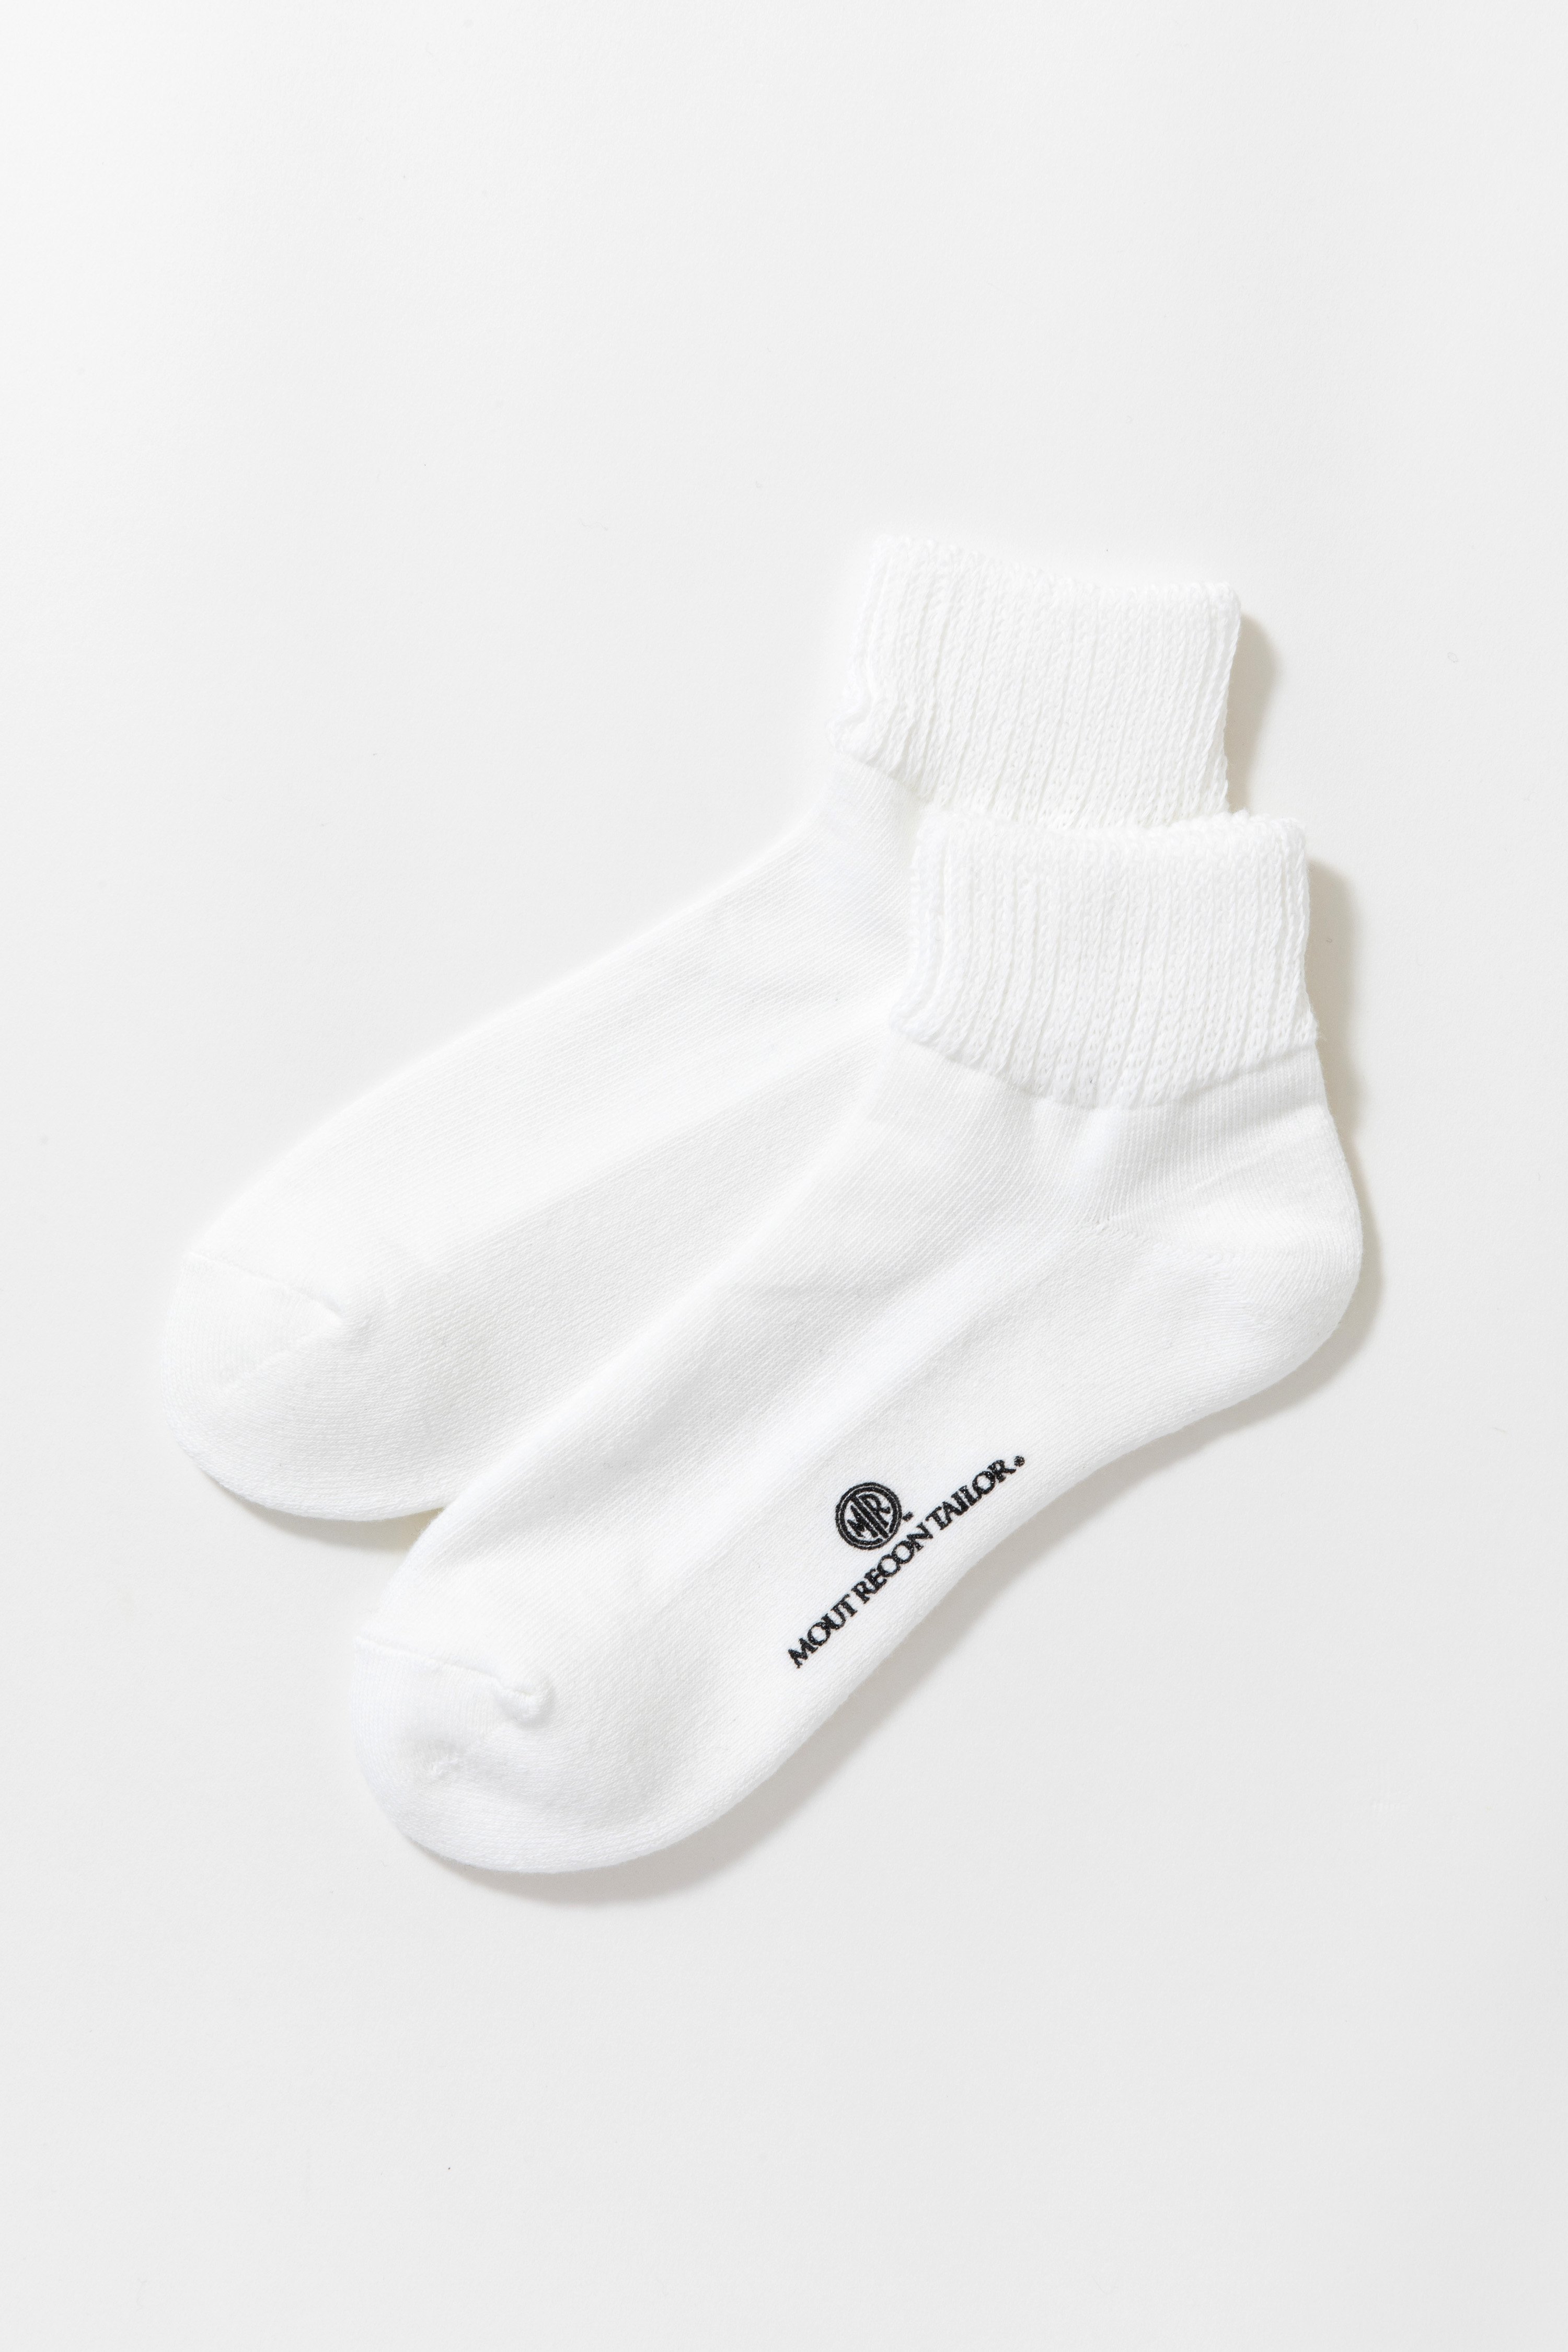 mout recon tailor anti microbial ankle length sock